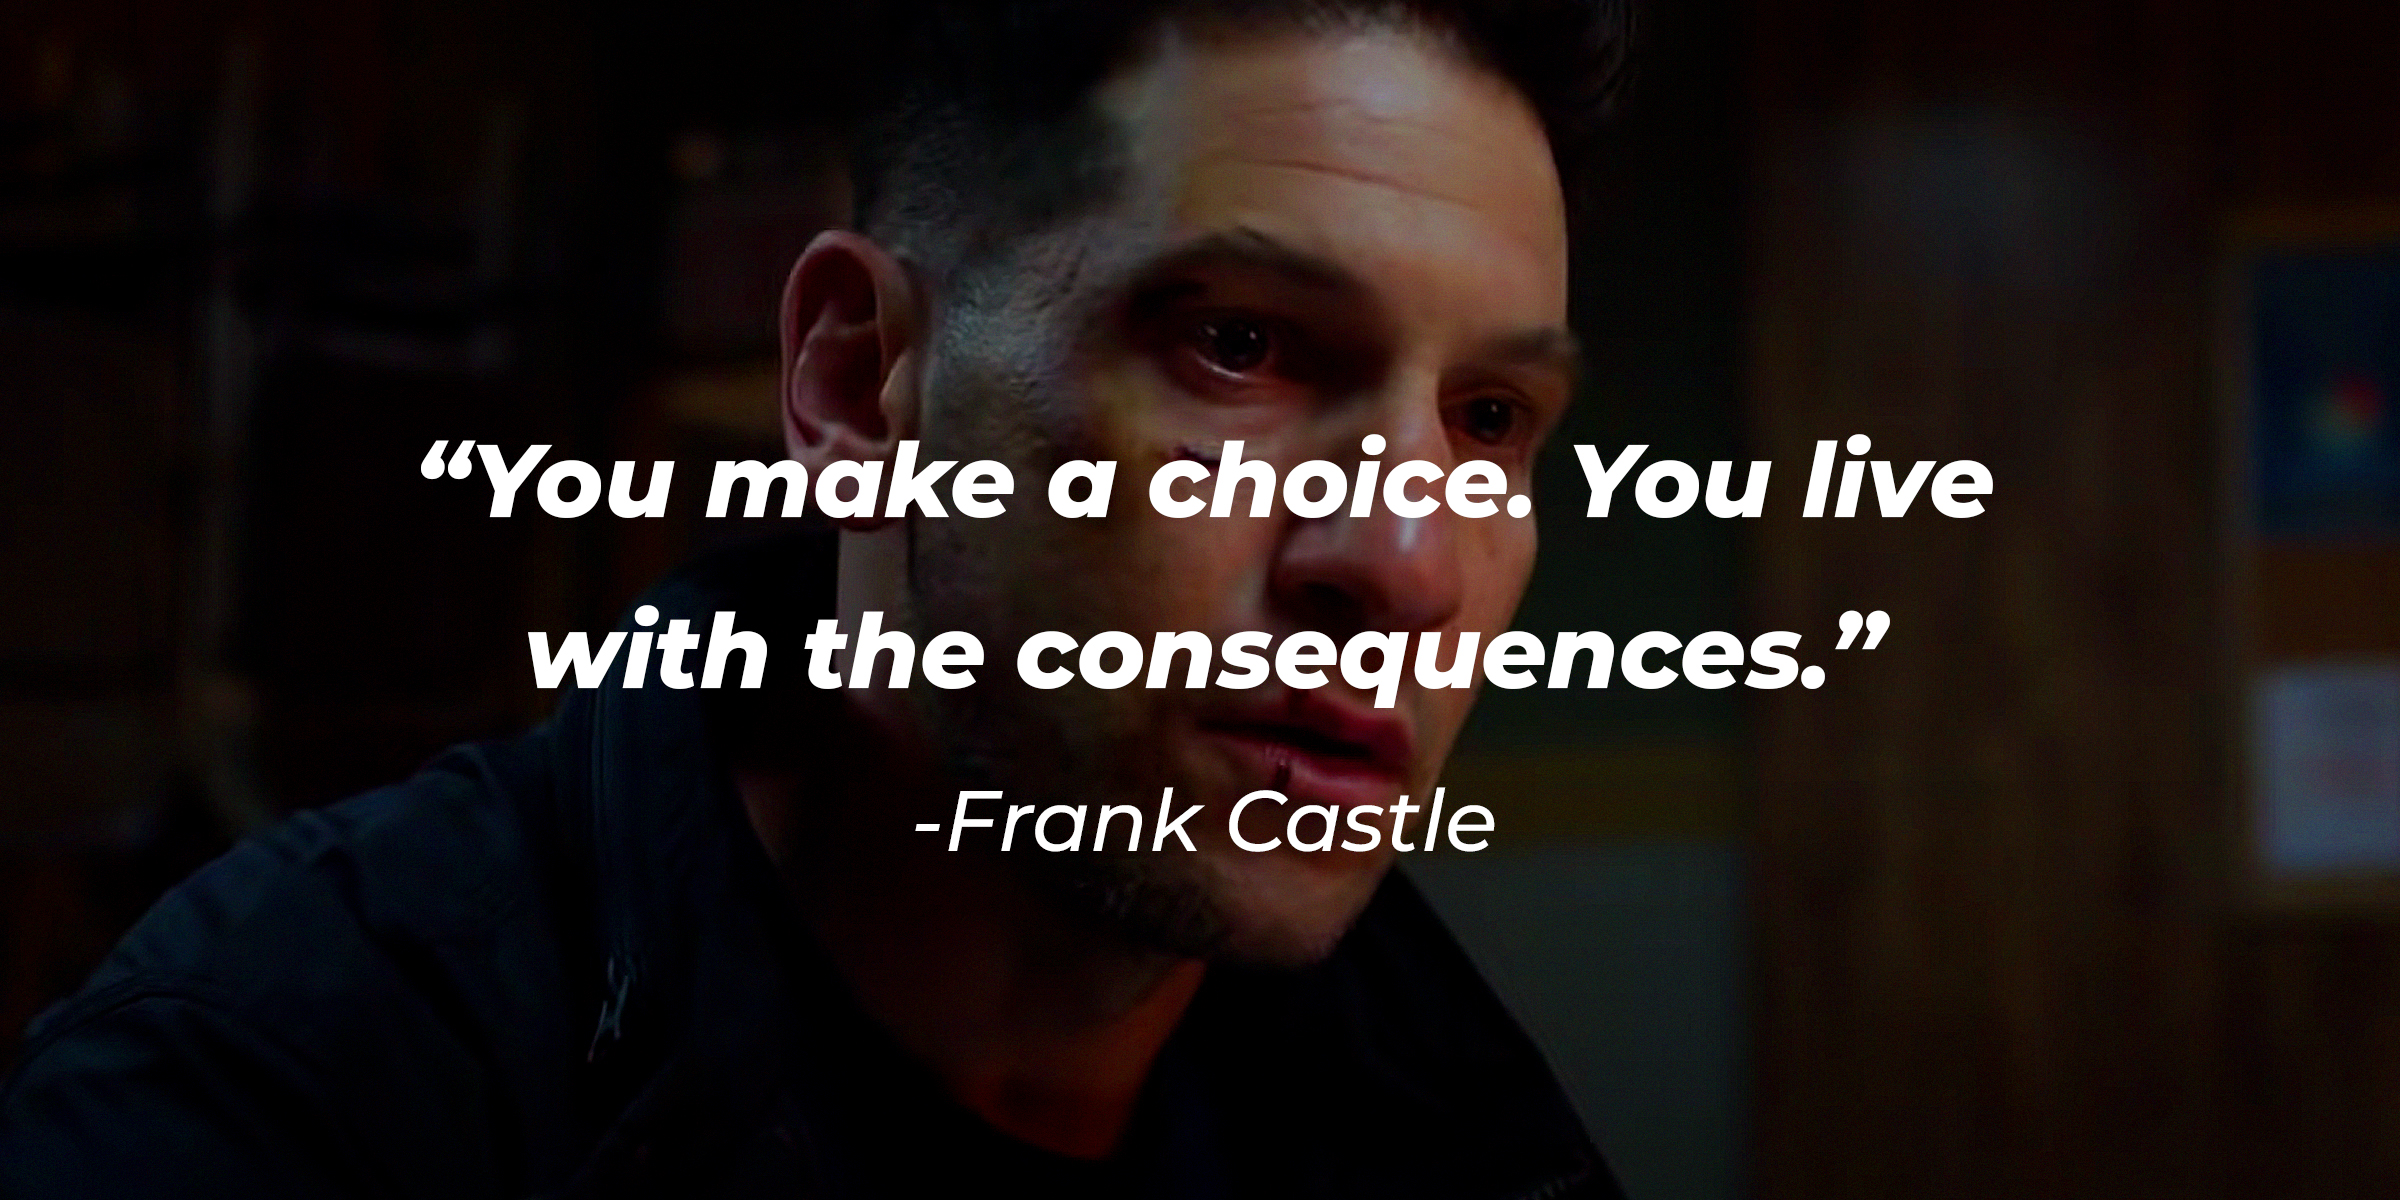 An image of Frank Castle, with his quote: “You make a choice. You live with the consequences.” | Source: Youtube.com/Netflix